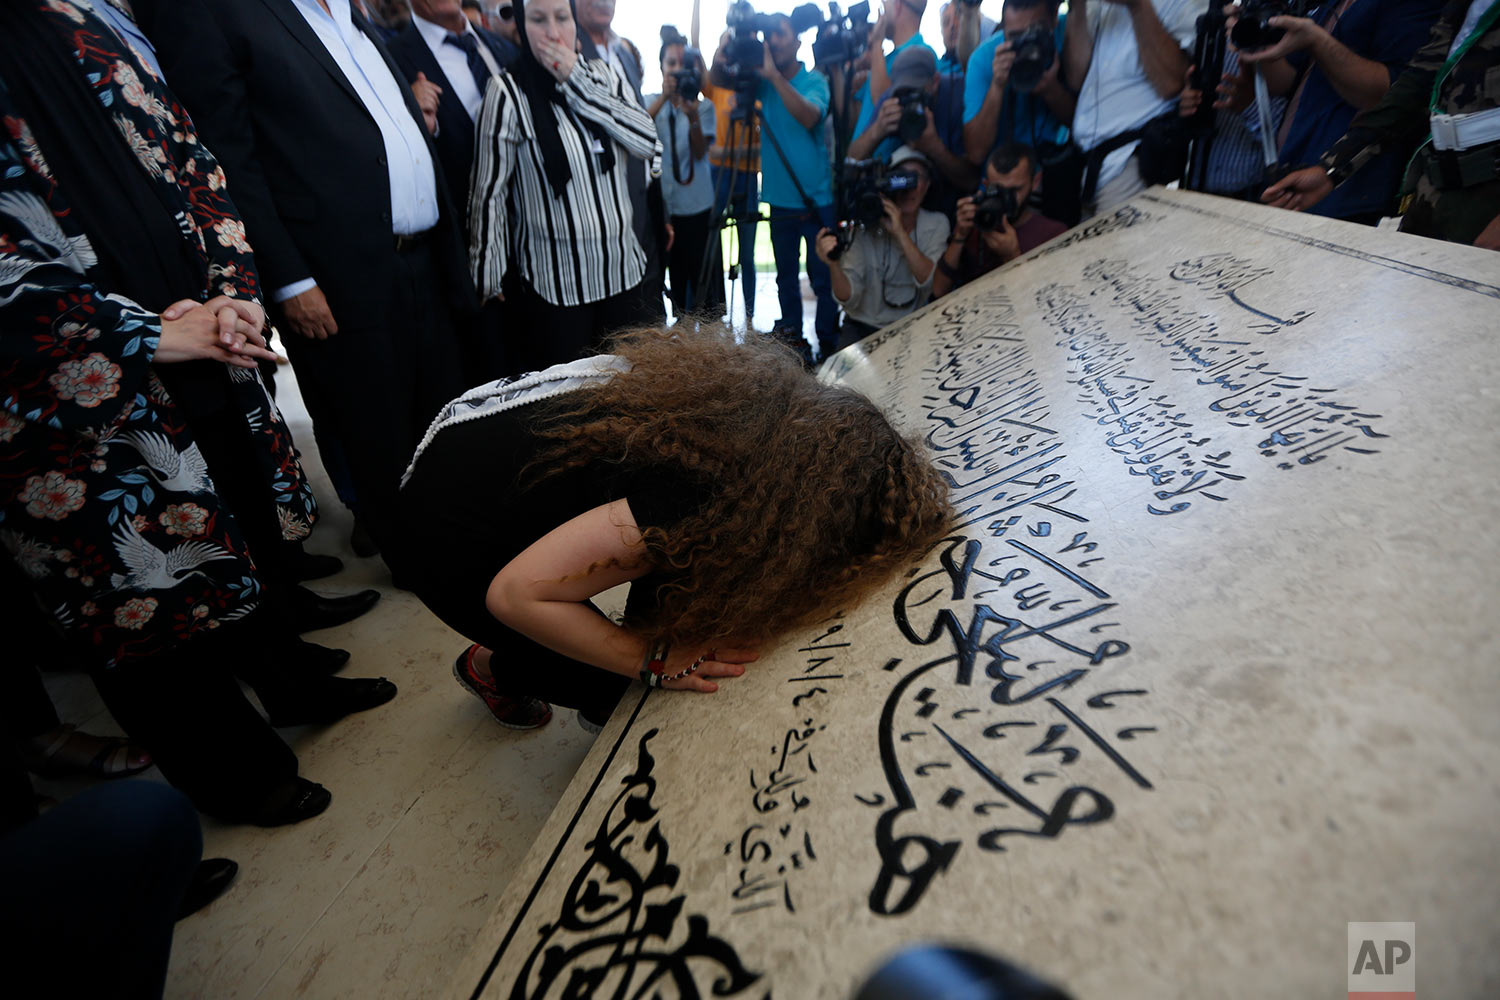  Ahed Tamimi prays at the tomb of former Palestinian leader Yasser Arafat in the West Bank city of Ramallah, Sunday, July 29, 2018. Palestinian protest icon Ahed Tamimi and her mother Nariman returned home to a hero's welcome in her West Bank village